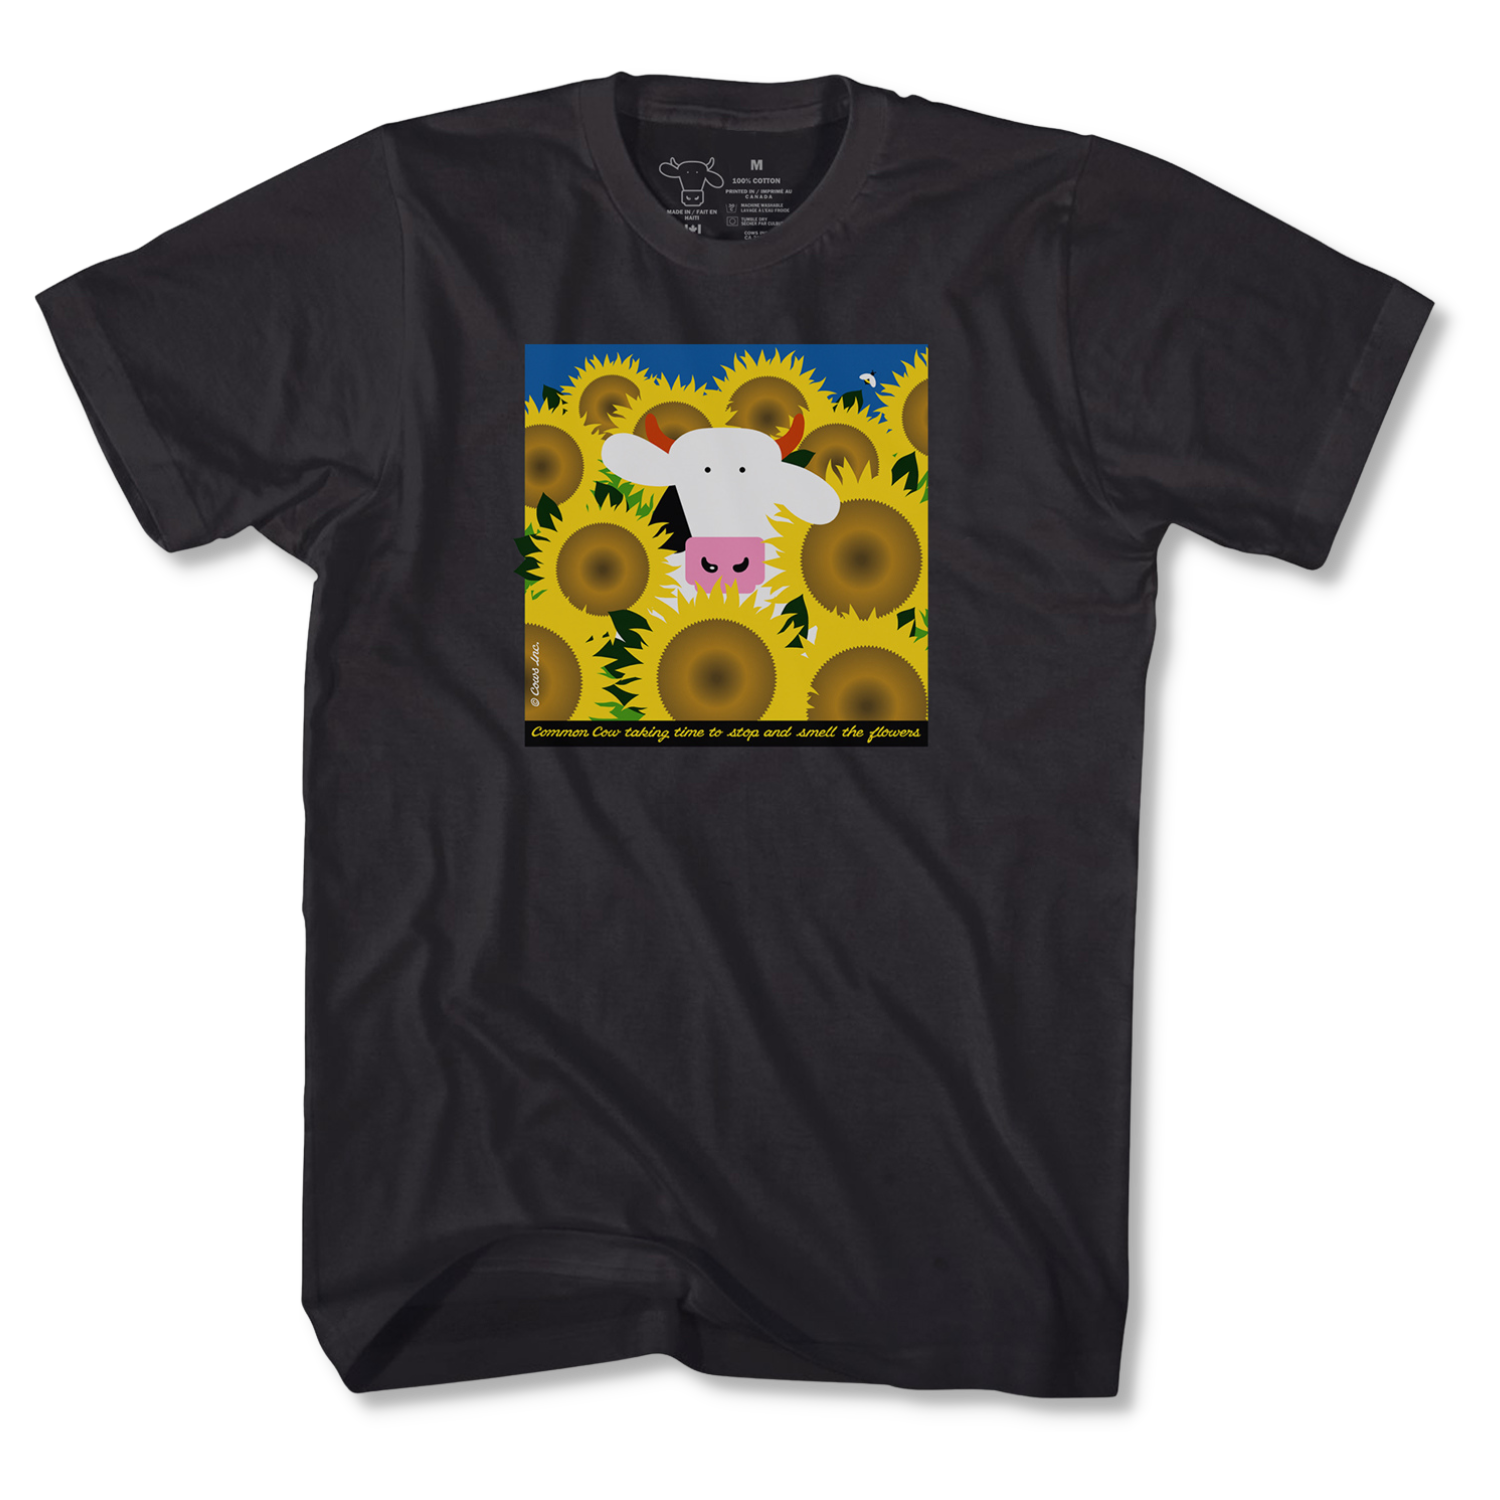 Sunflower COWS Classic T